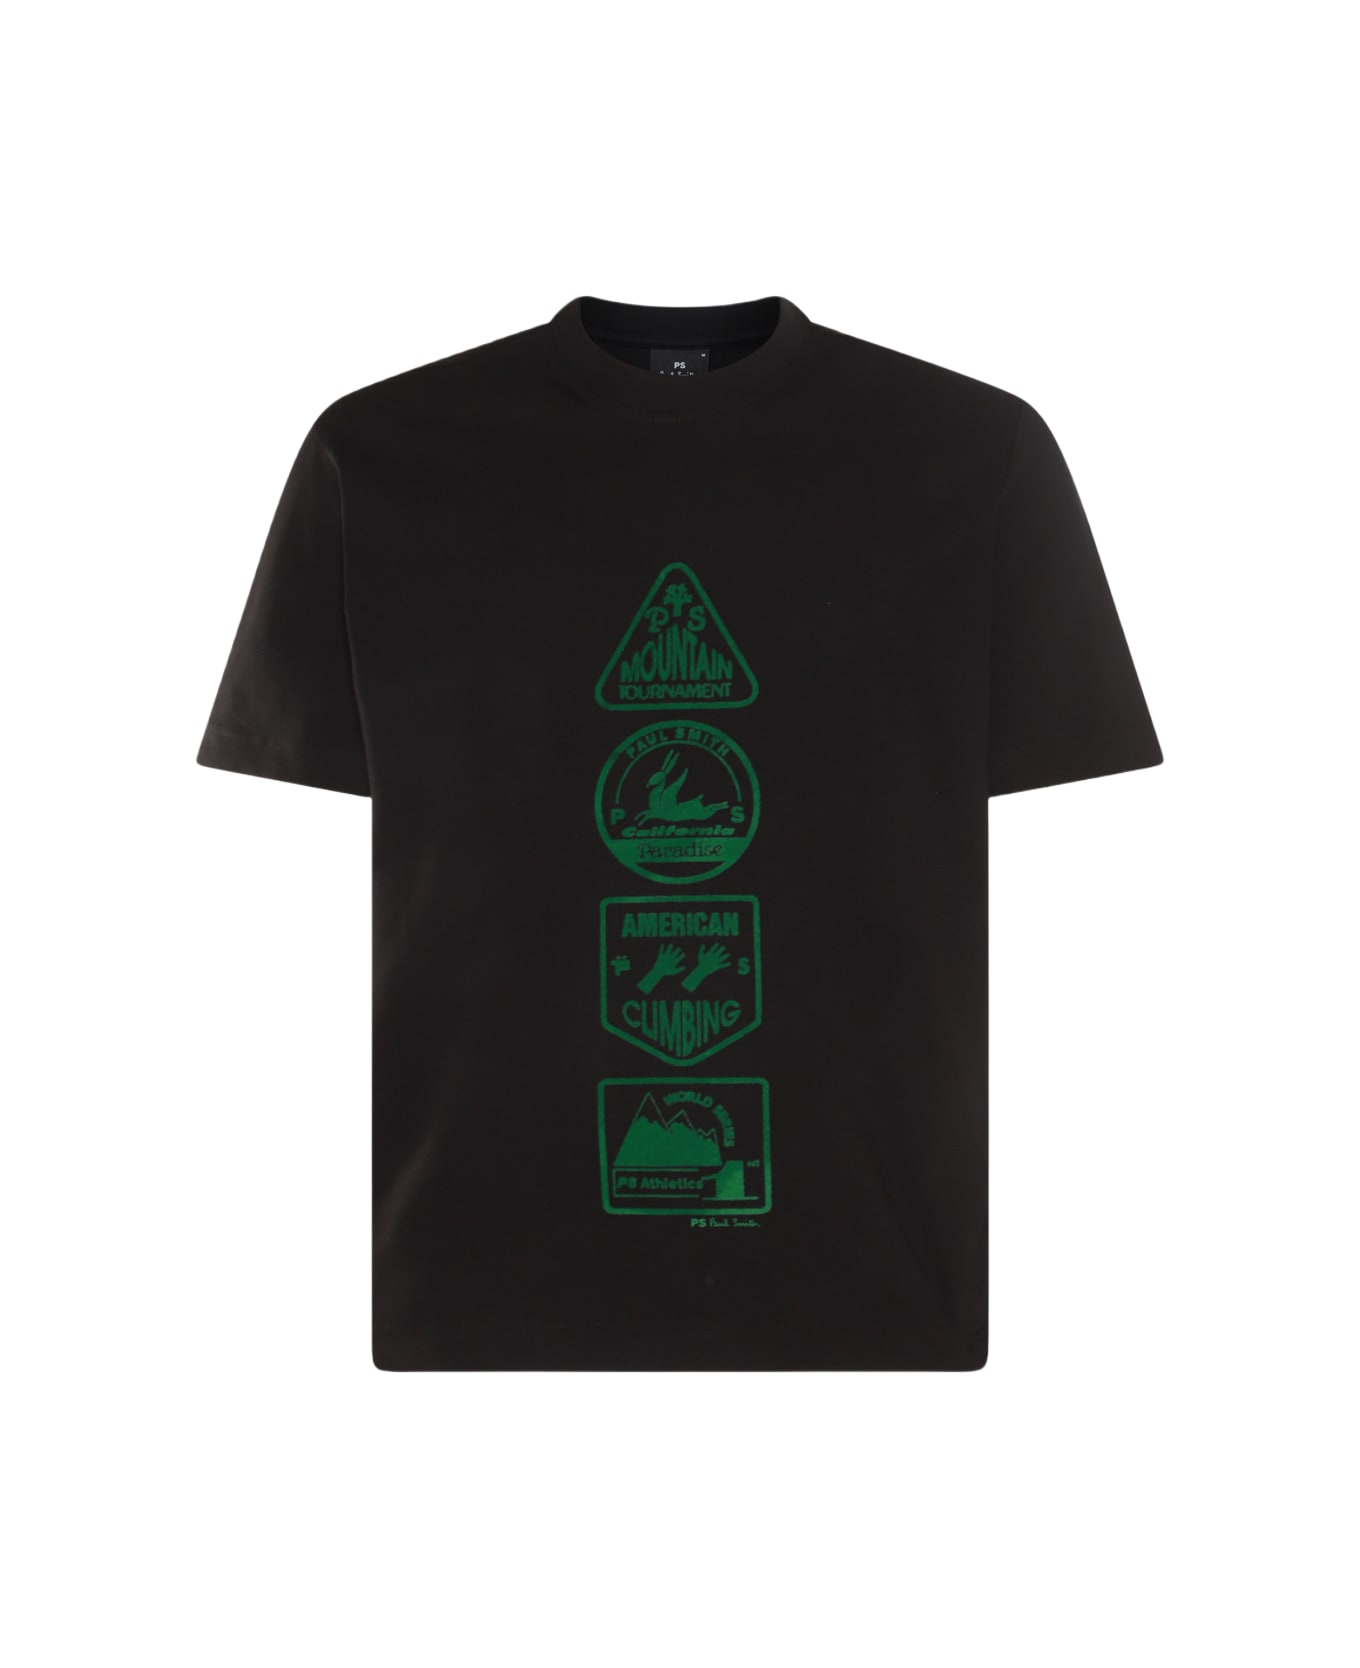 Paul Smith Black And Green Cotton T-shirt - Black シャツ